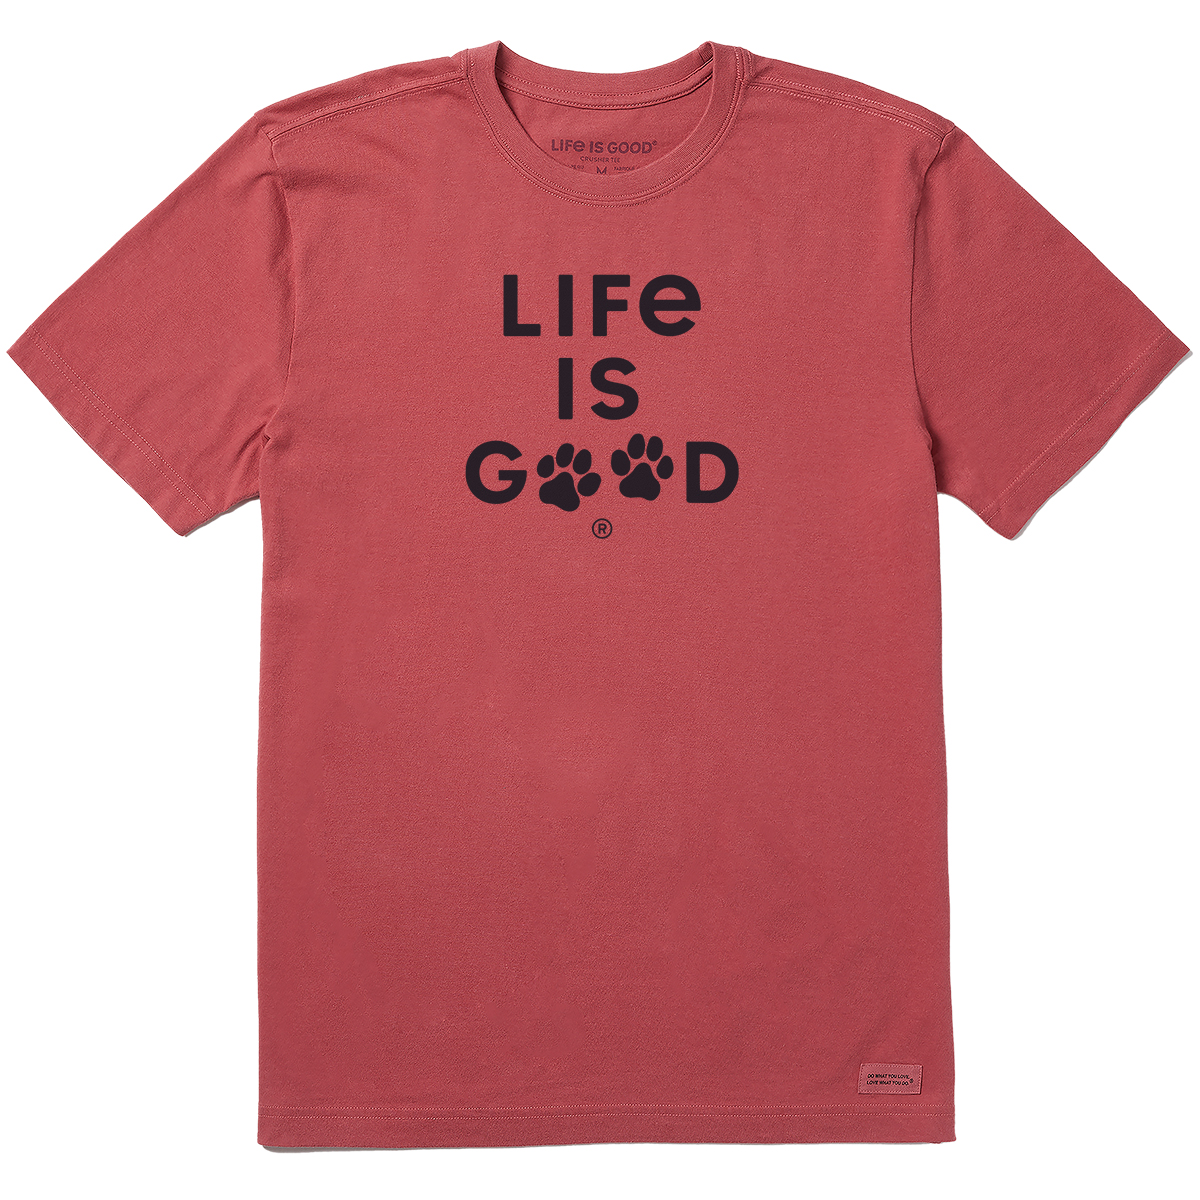 Life Is Good Men's Paw Print Short-Sleeve Crusher Tee, Red